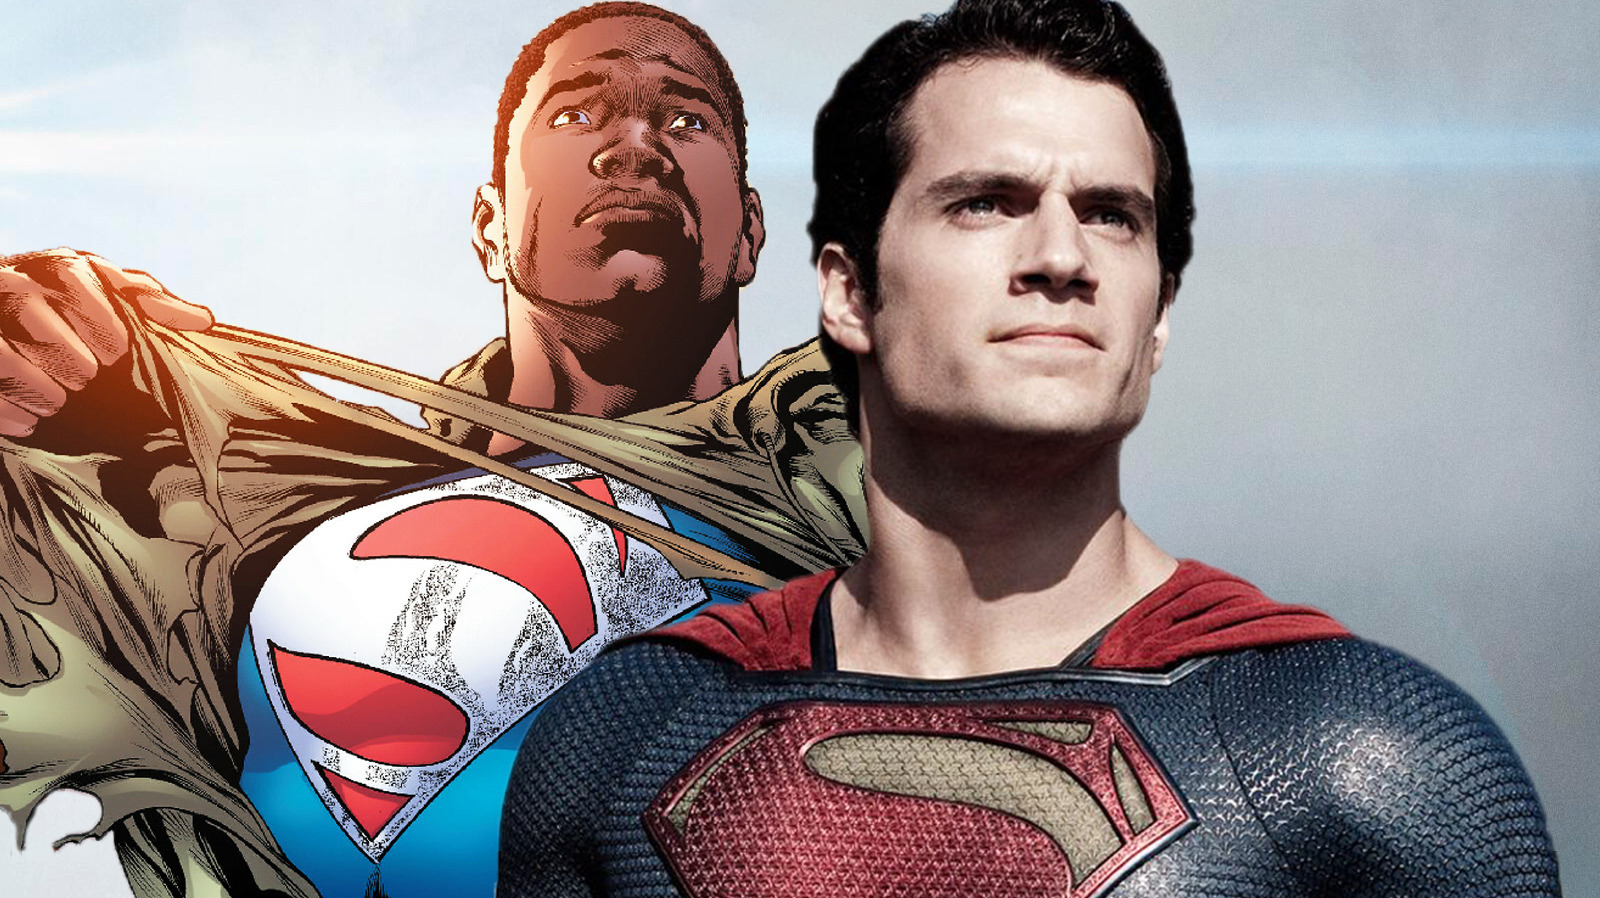 Henry Cavill Gives DC's Black Superman Movie His Blessing: 'Far More Than  Skin Color